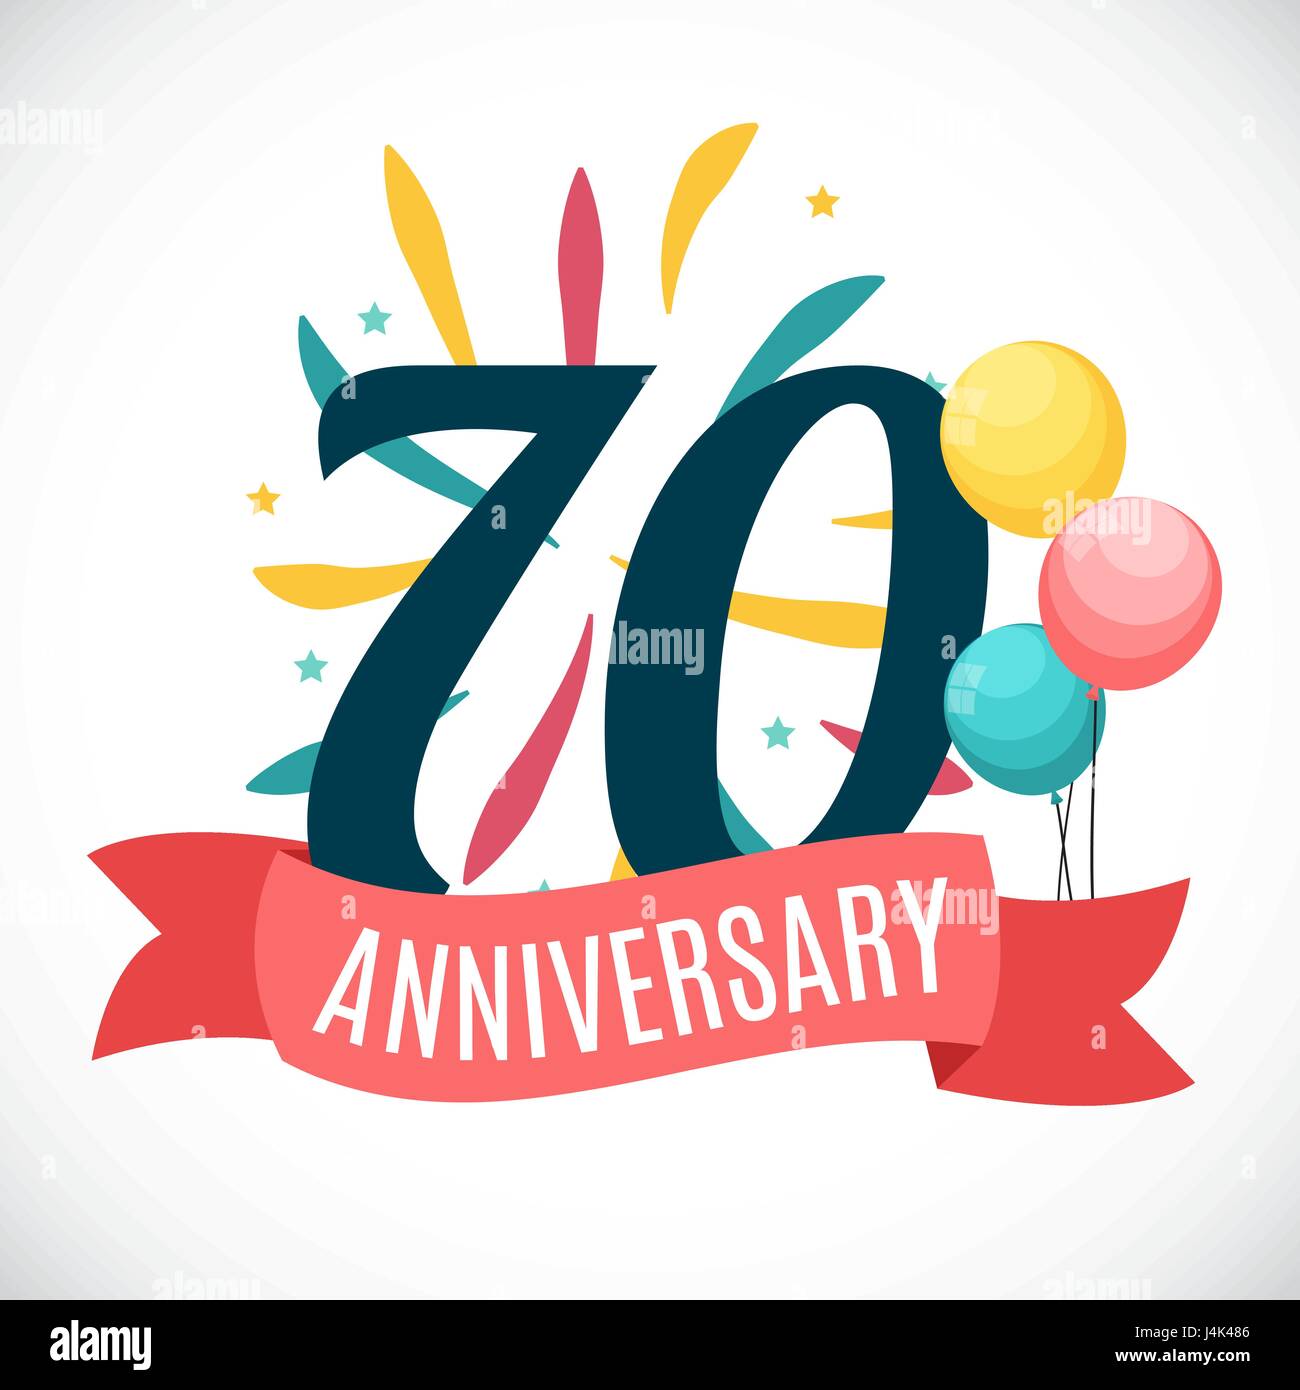 Anniversary 70 Years Template with Ribbon Vector Illustration Stock Vector